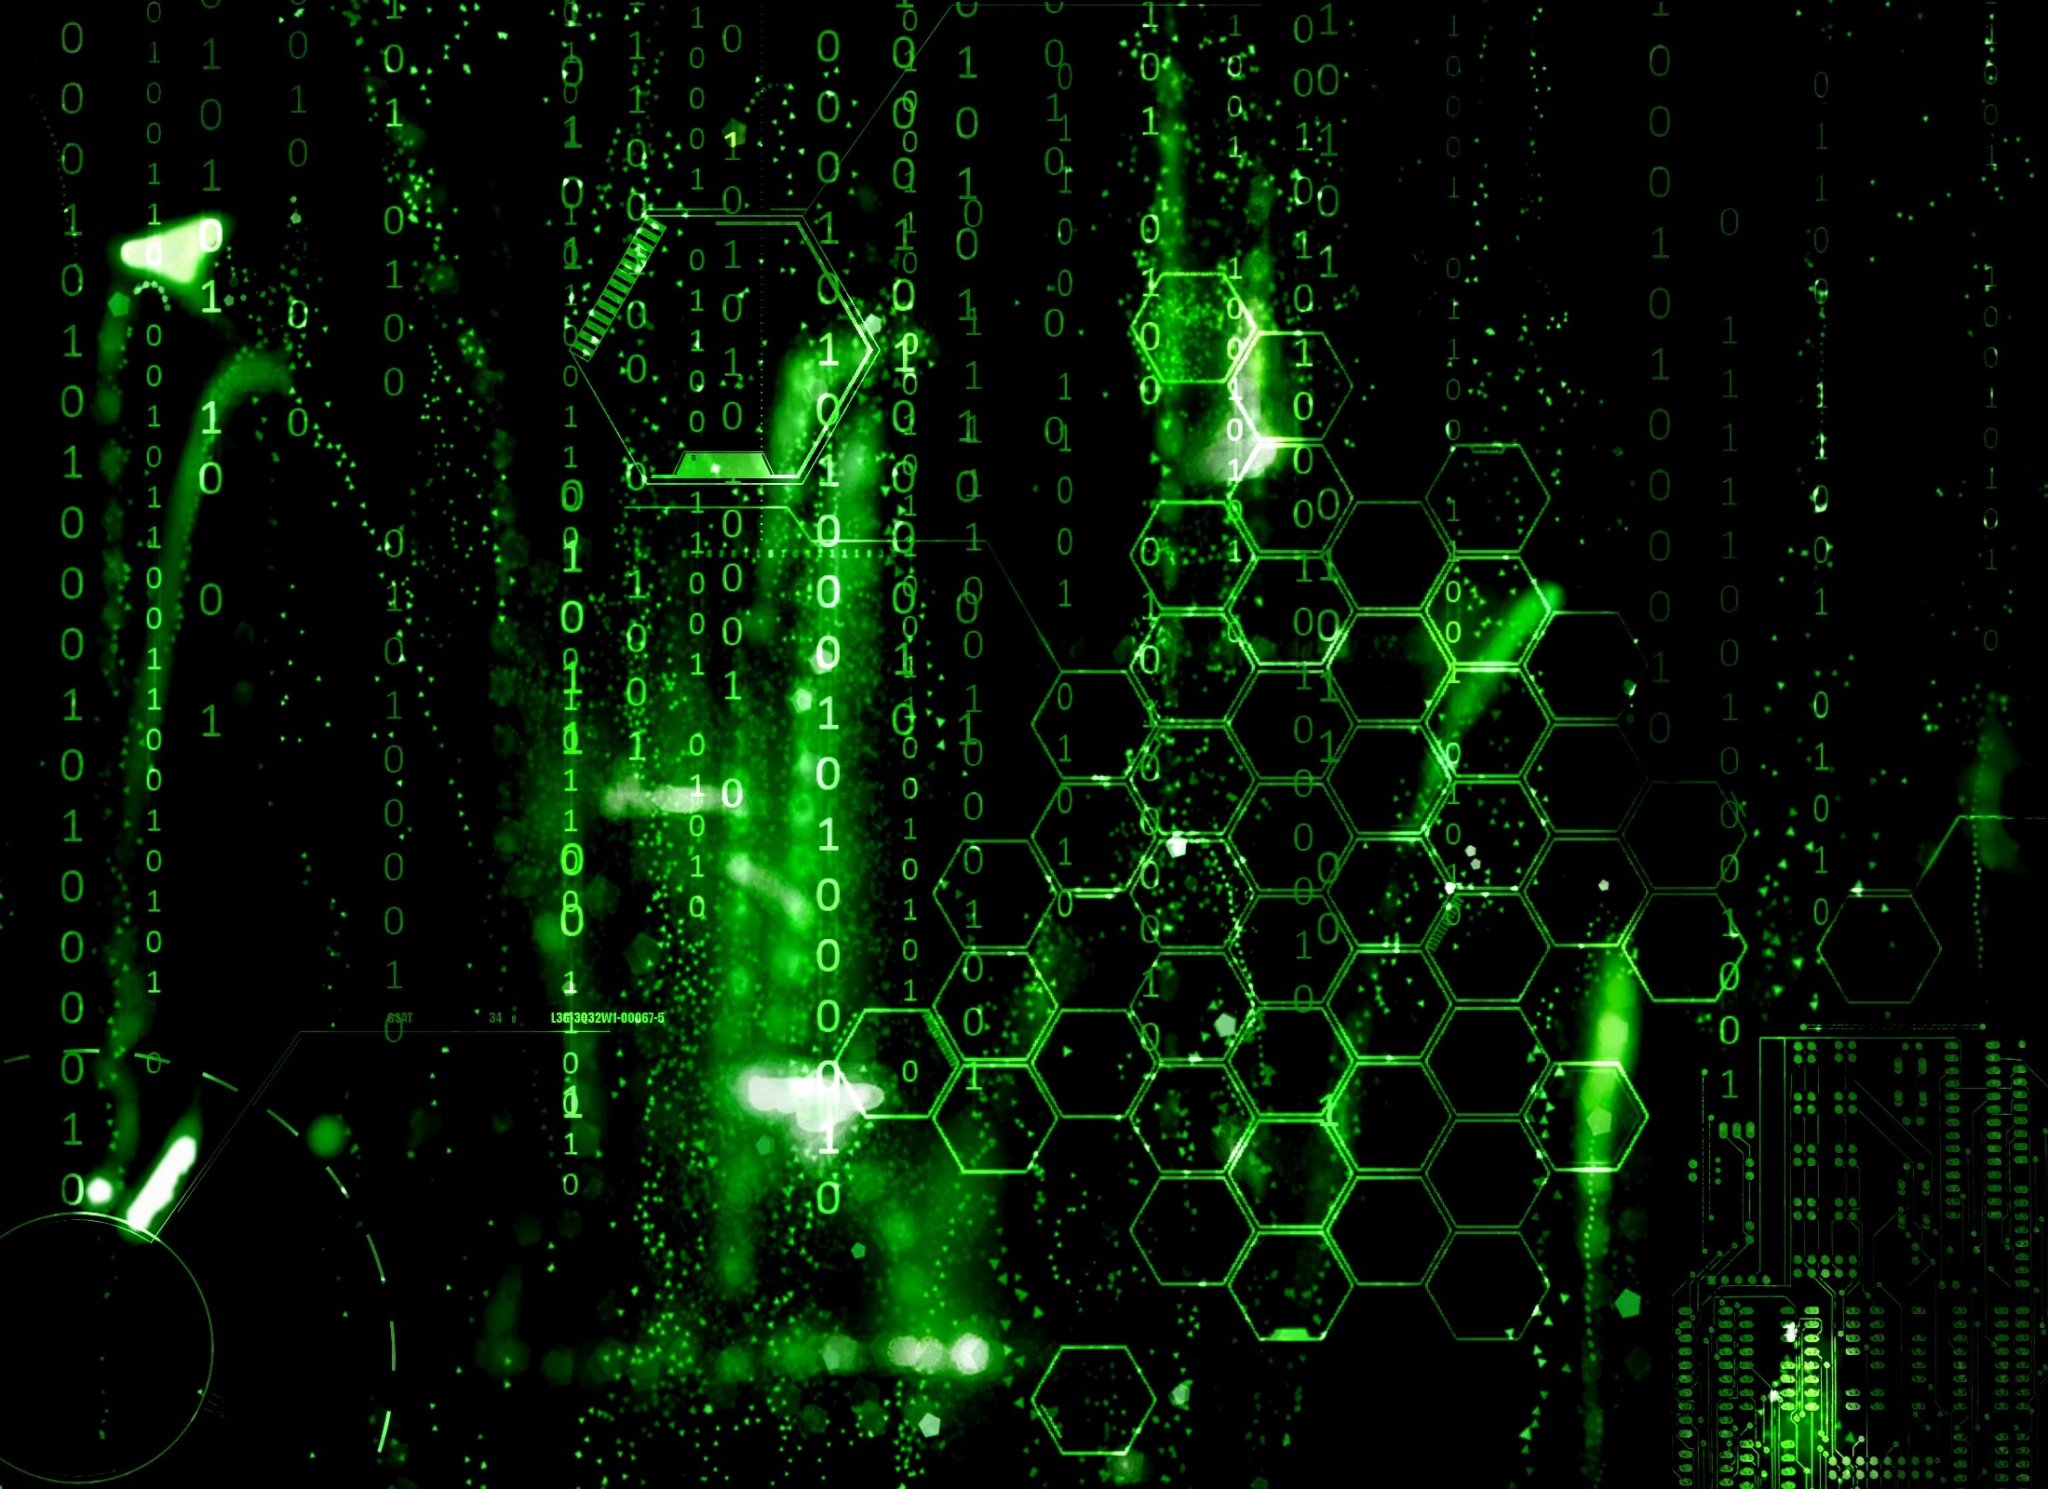 Matrix wallpaper download for android mobile